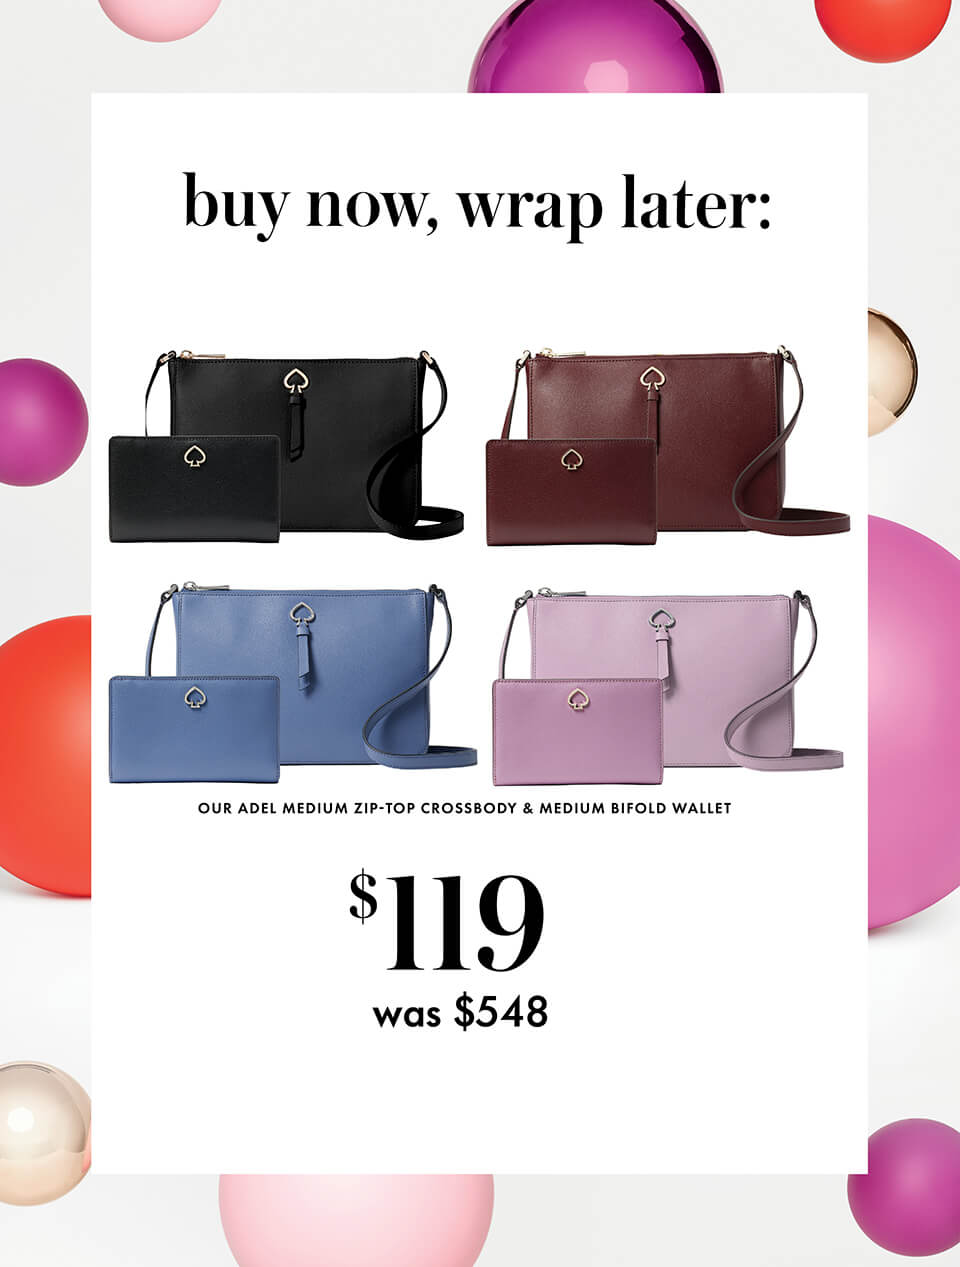 kate spade outlet canada